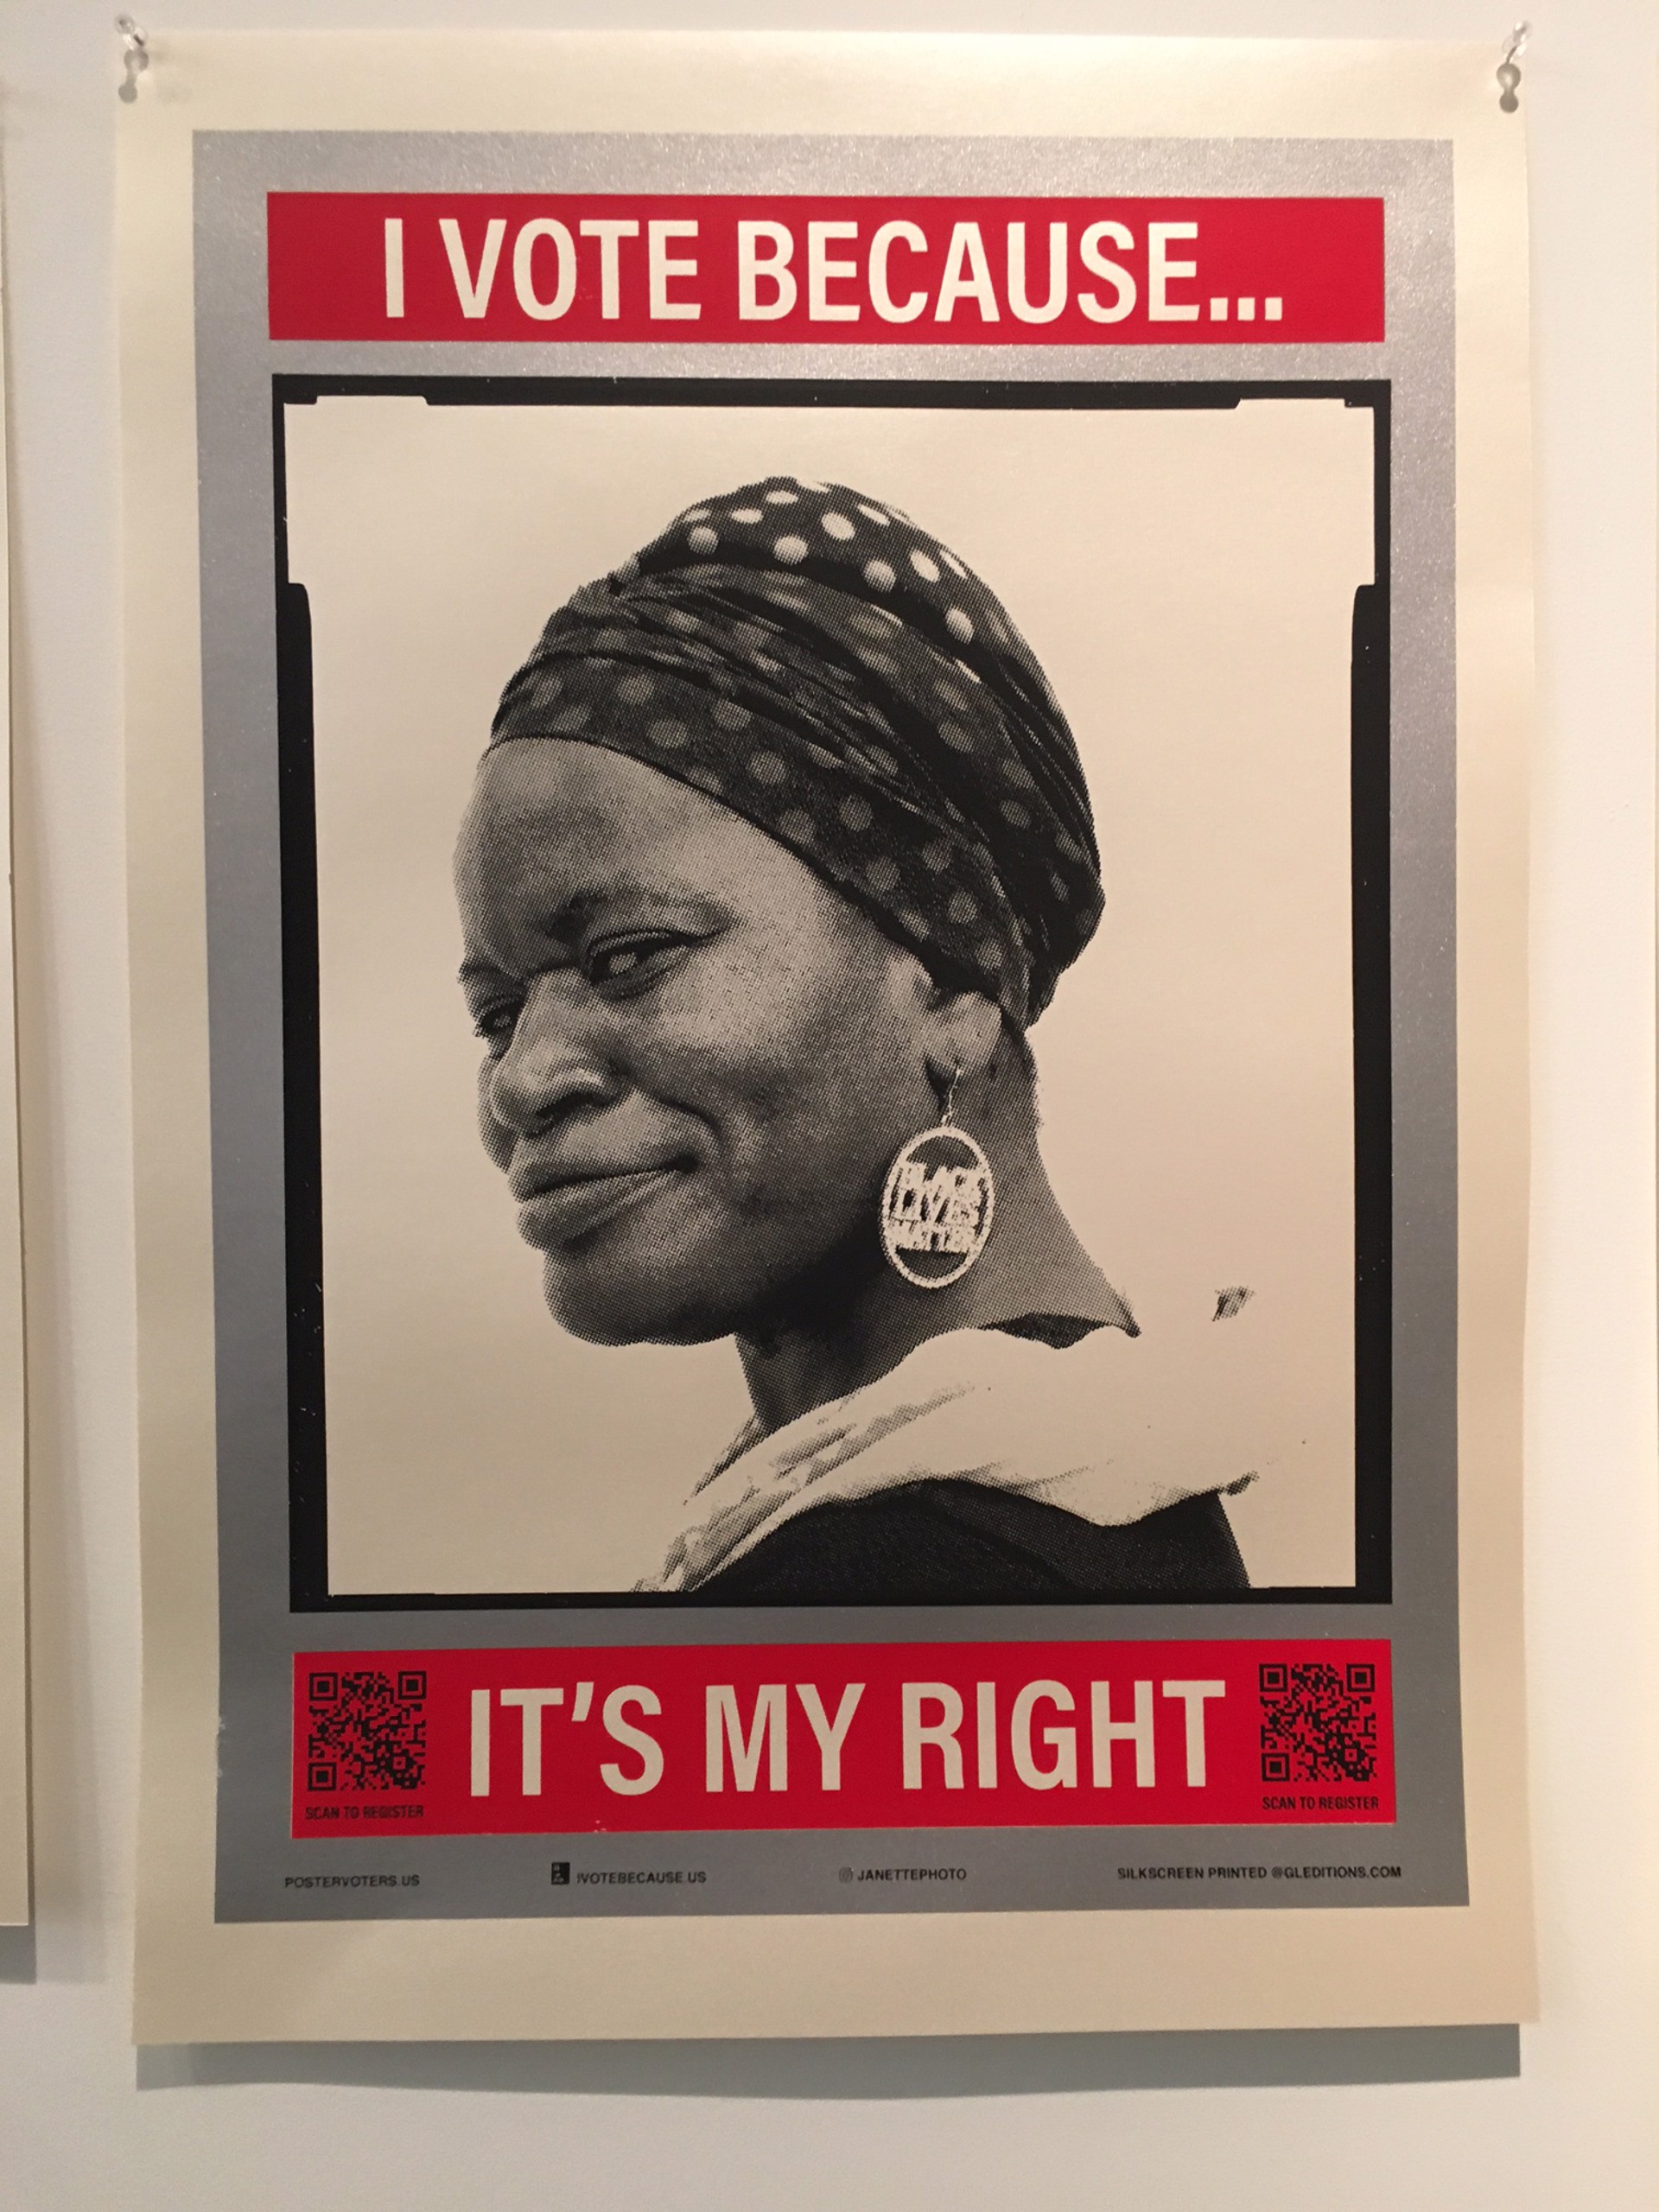 I Vote Because It's My Right by Janette Beckman